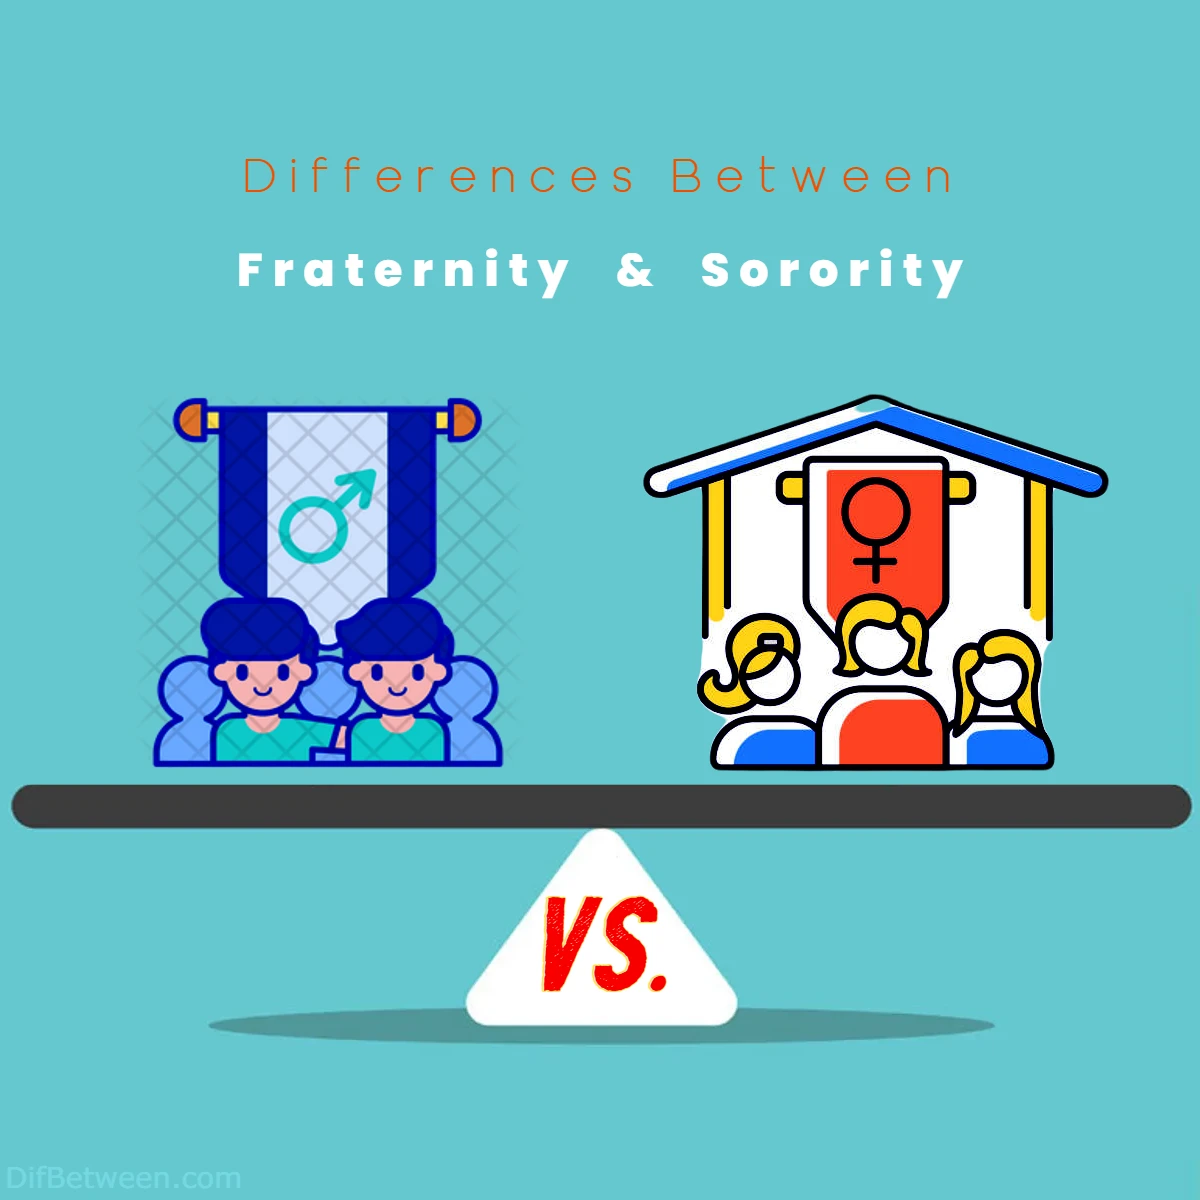 Differences Between Fraternity vs Sorority